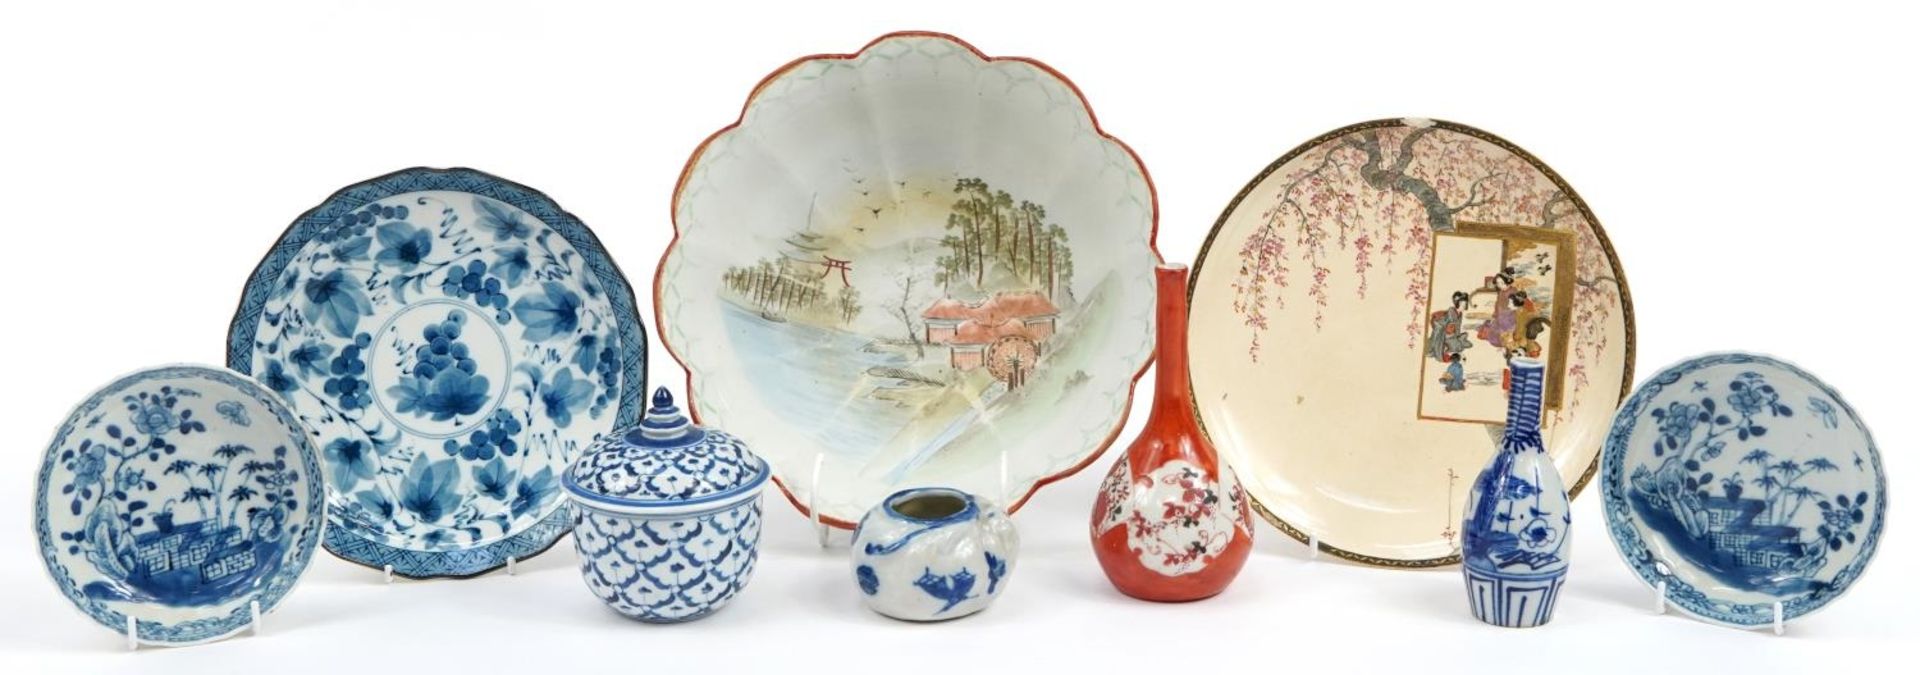 Chinese and Japanese ceramics including a pair of blue and white dishes hand painted with flowers